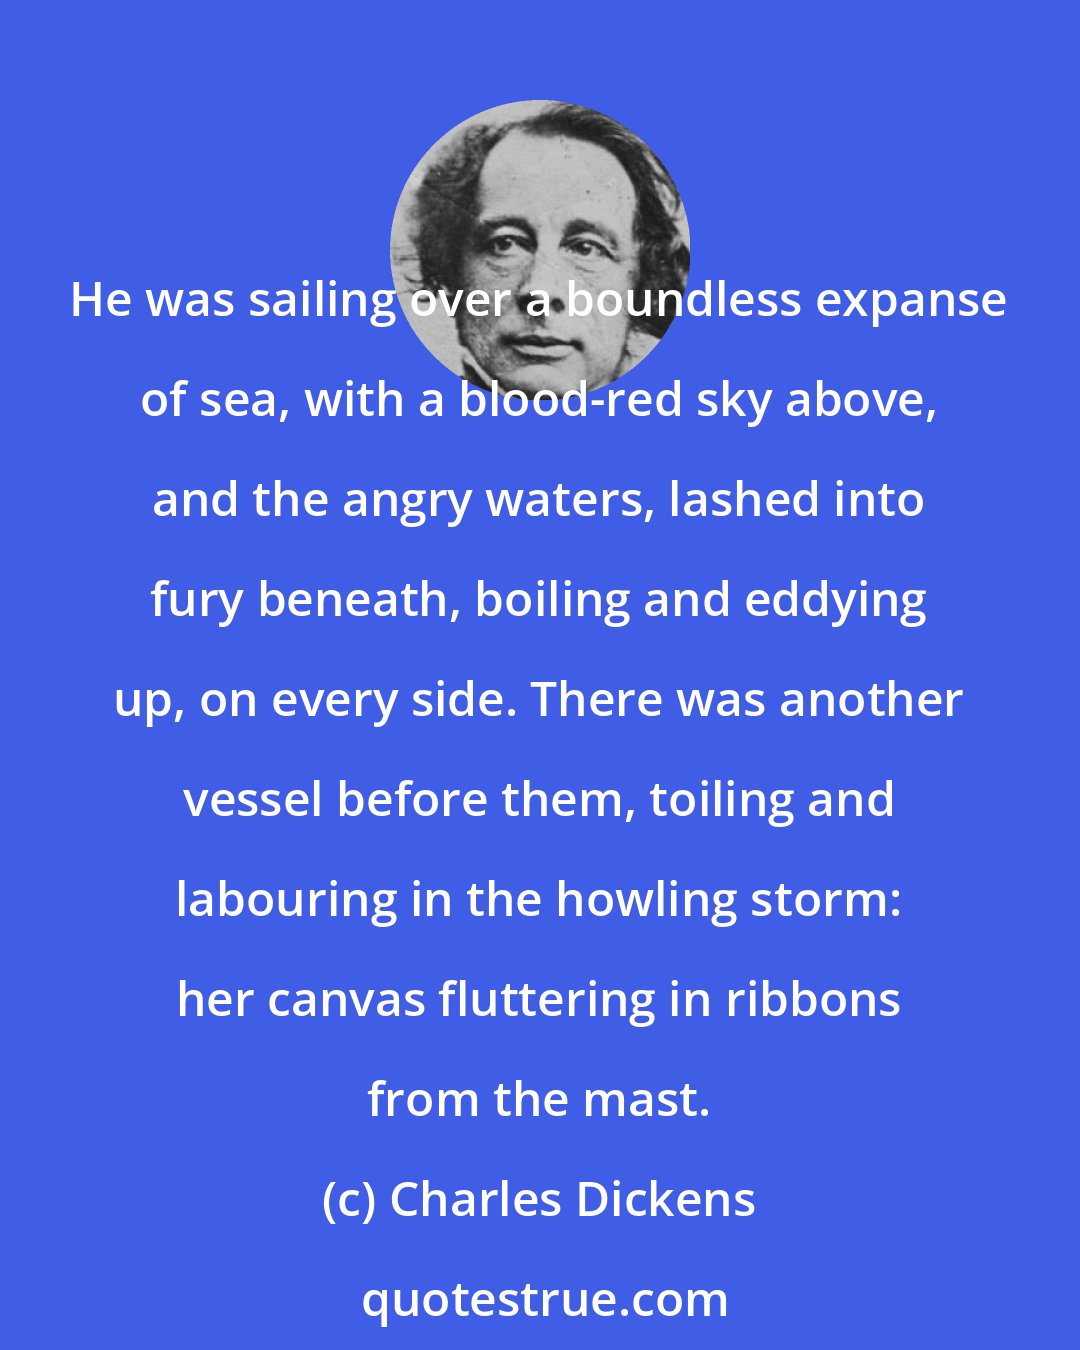 Charles Dickens: He was sailing over a boundless expanse of sea, with a blood-red sky above, and the angry waters, lashed into fury beneath, boiling and eddying up, on every side. There was another vessel before them, toiling and labouring in the howling storm: her canvas fluttering in ribbons from the mast.